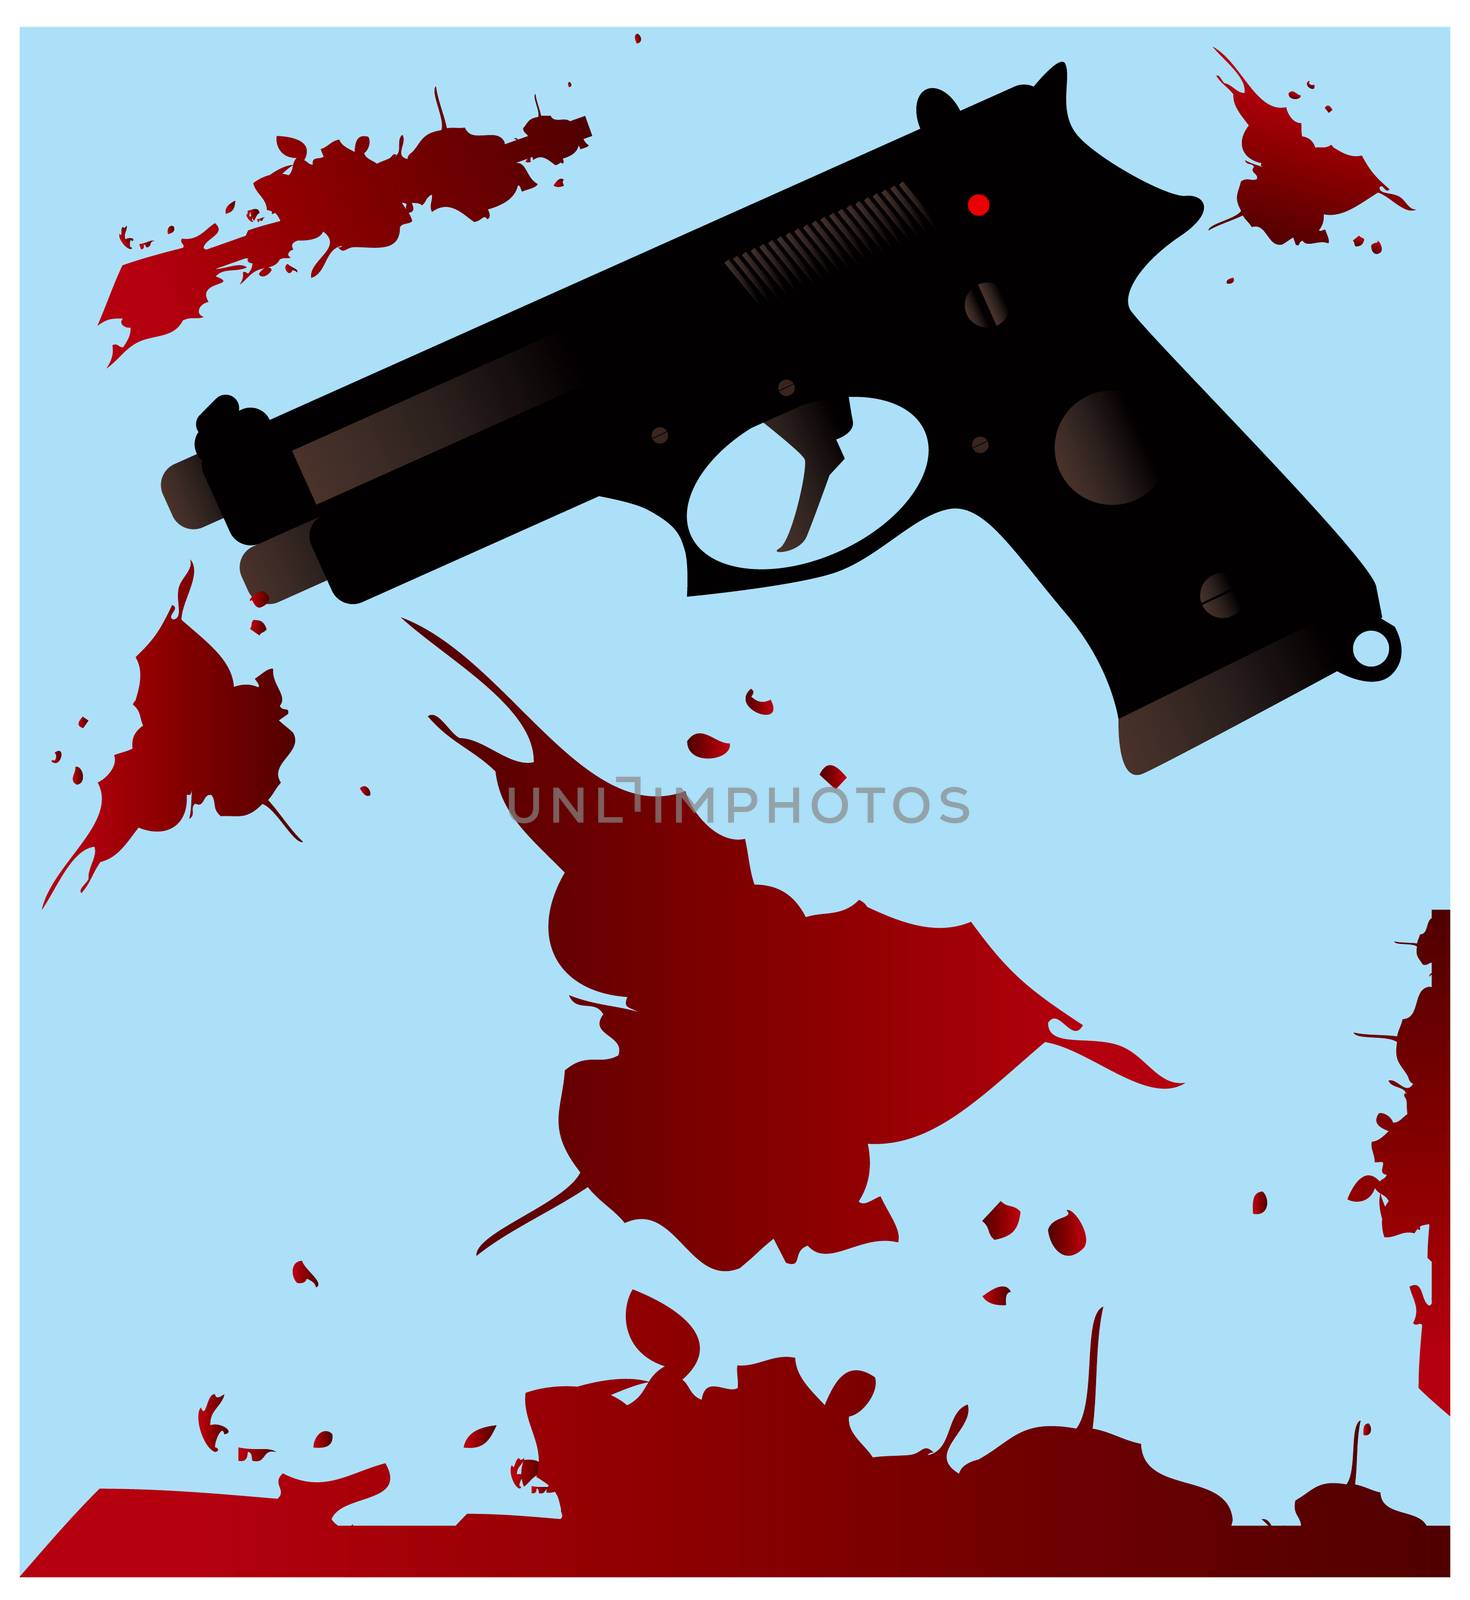 Gun silhouette with blood splatter on a white background Crime concept template with space